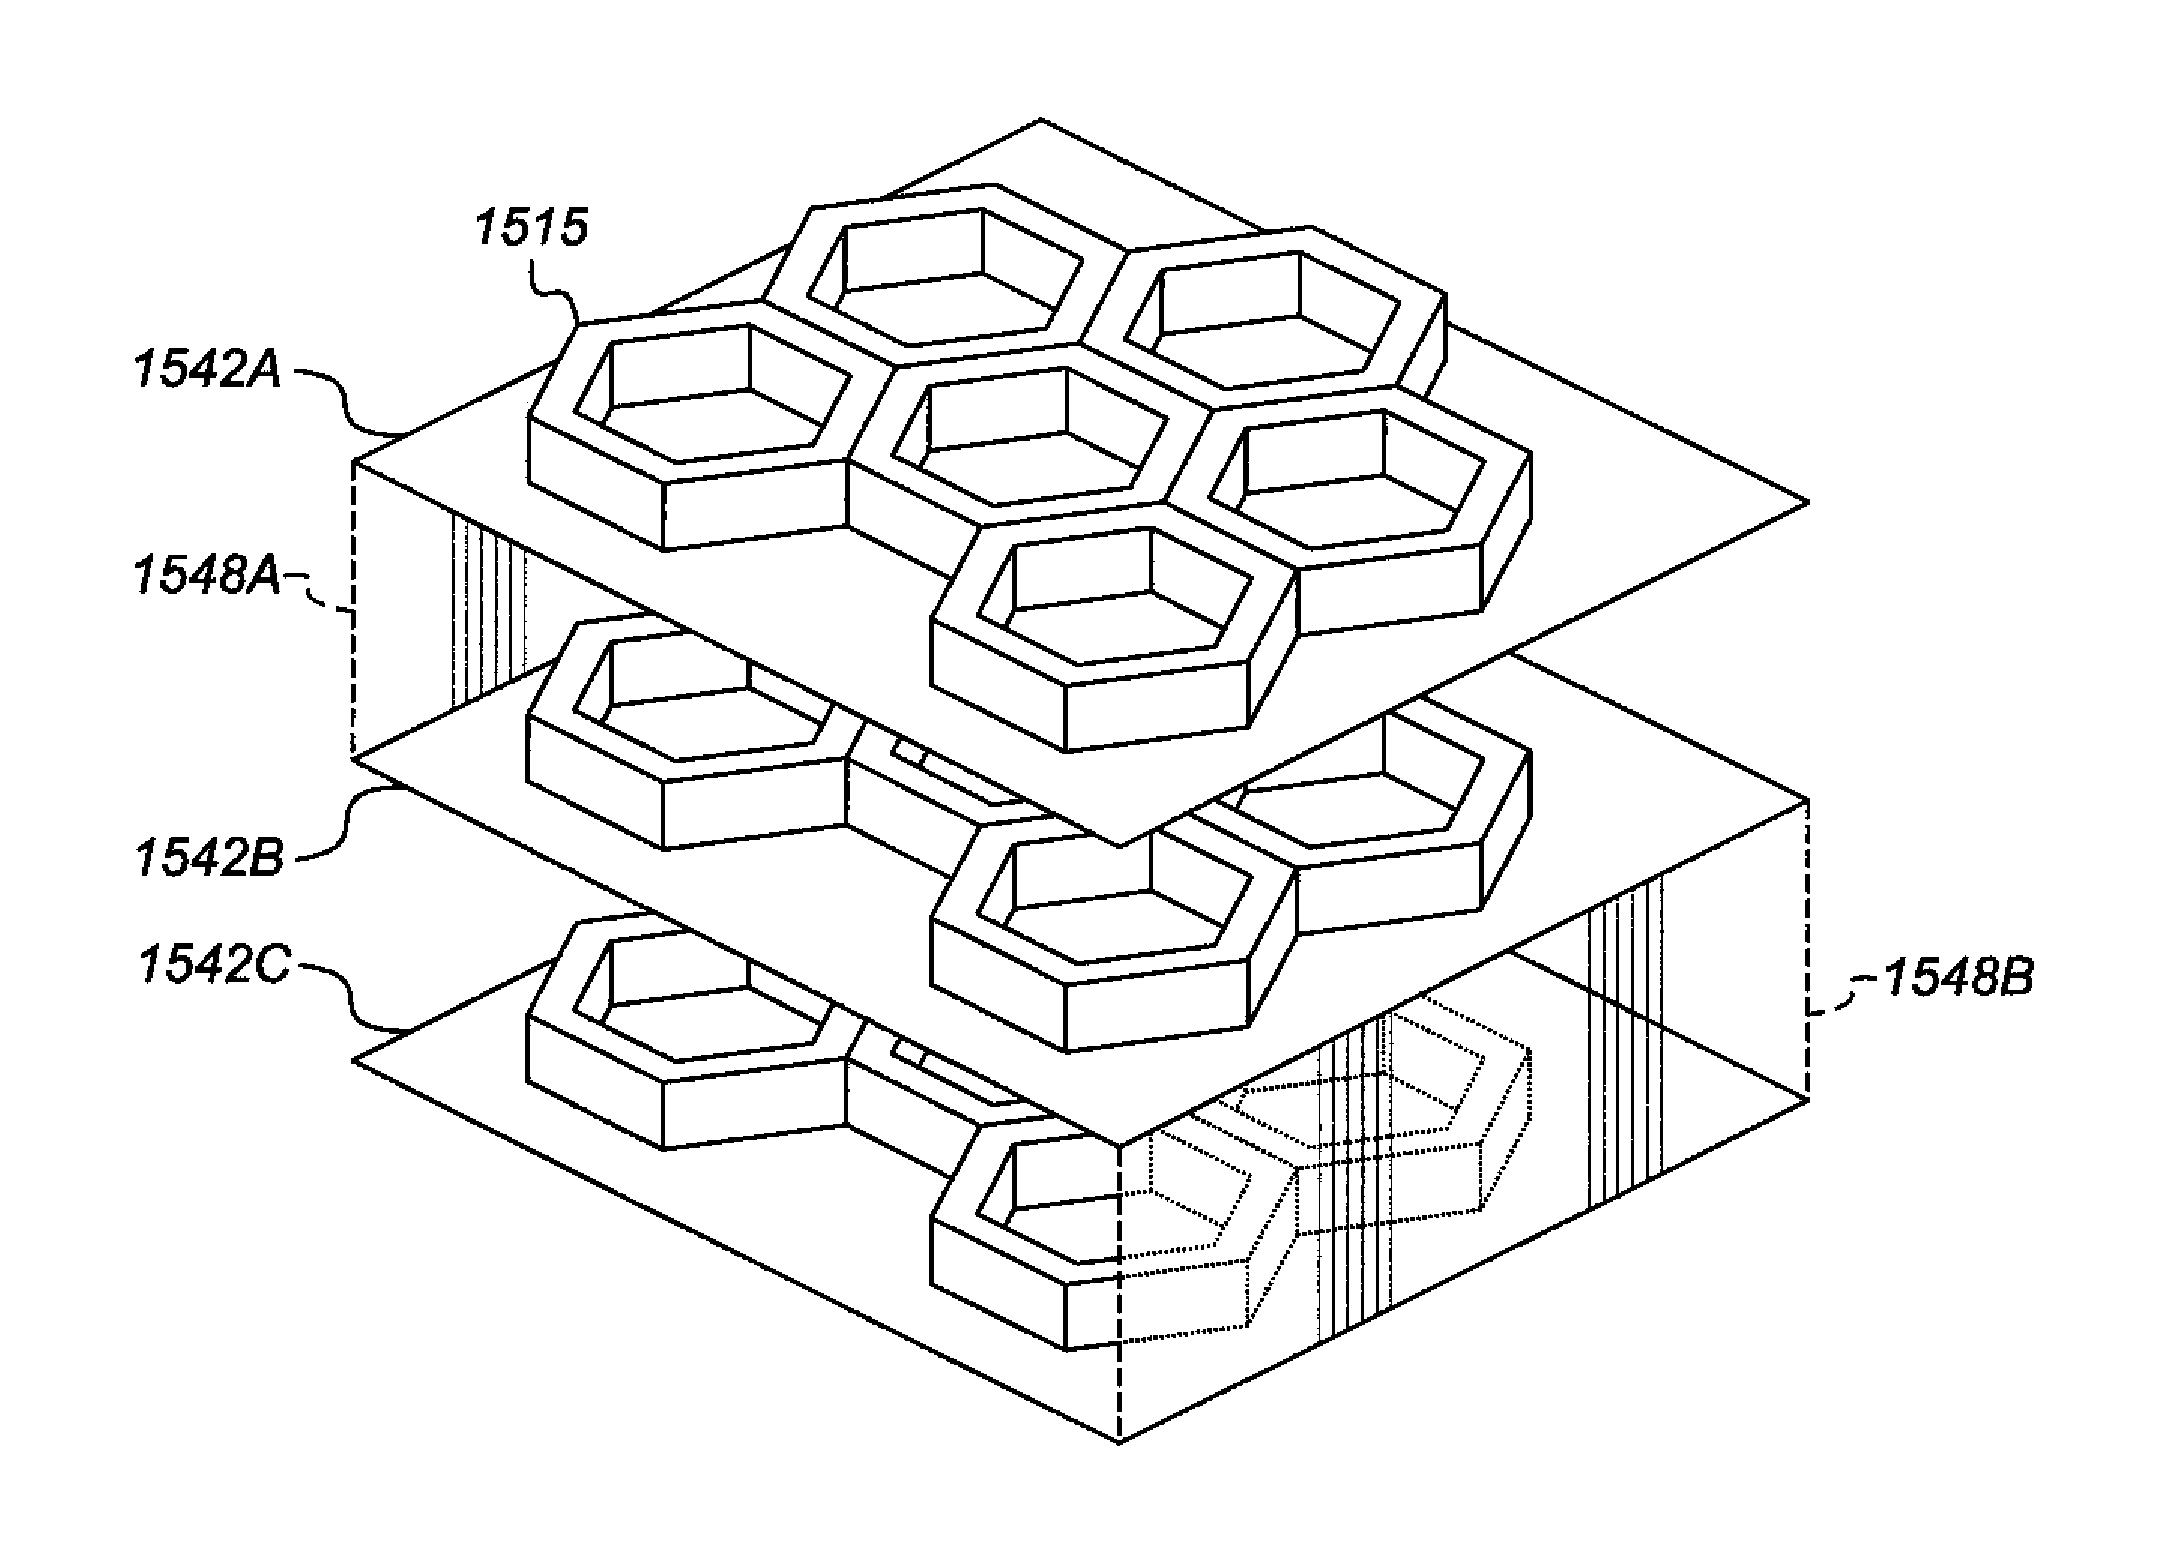 Forming three-dimensional structure from receiver